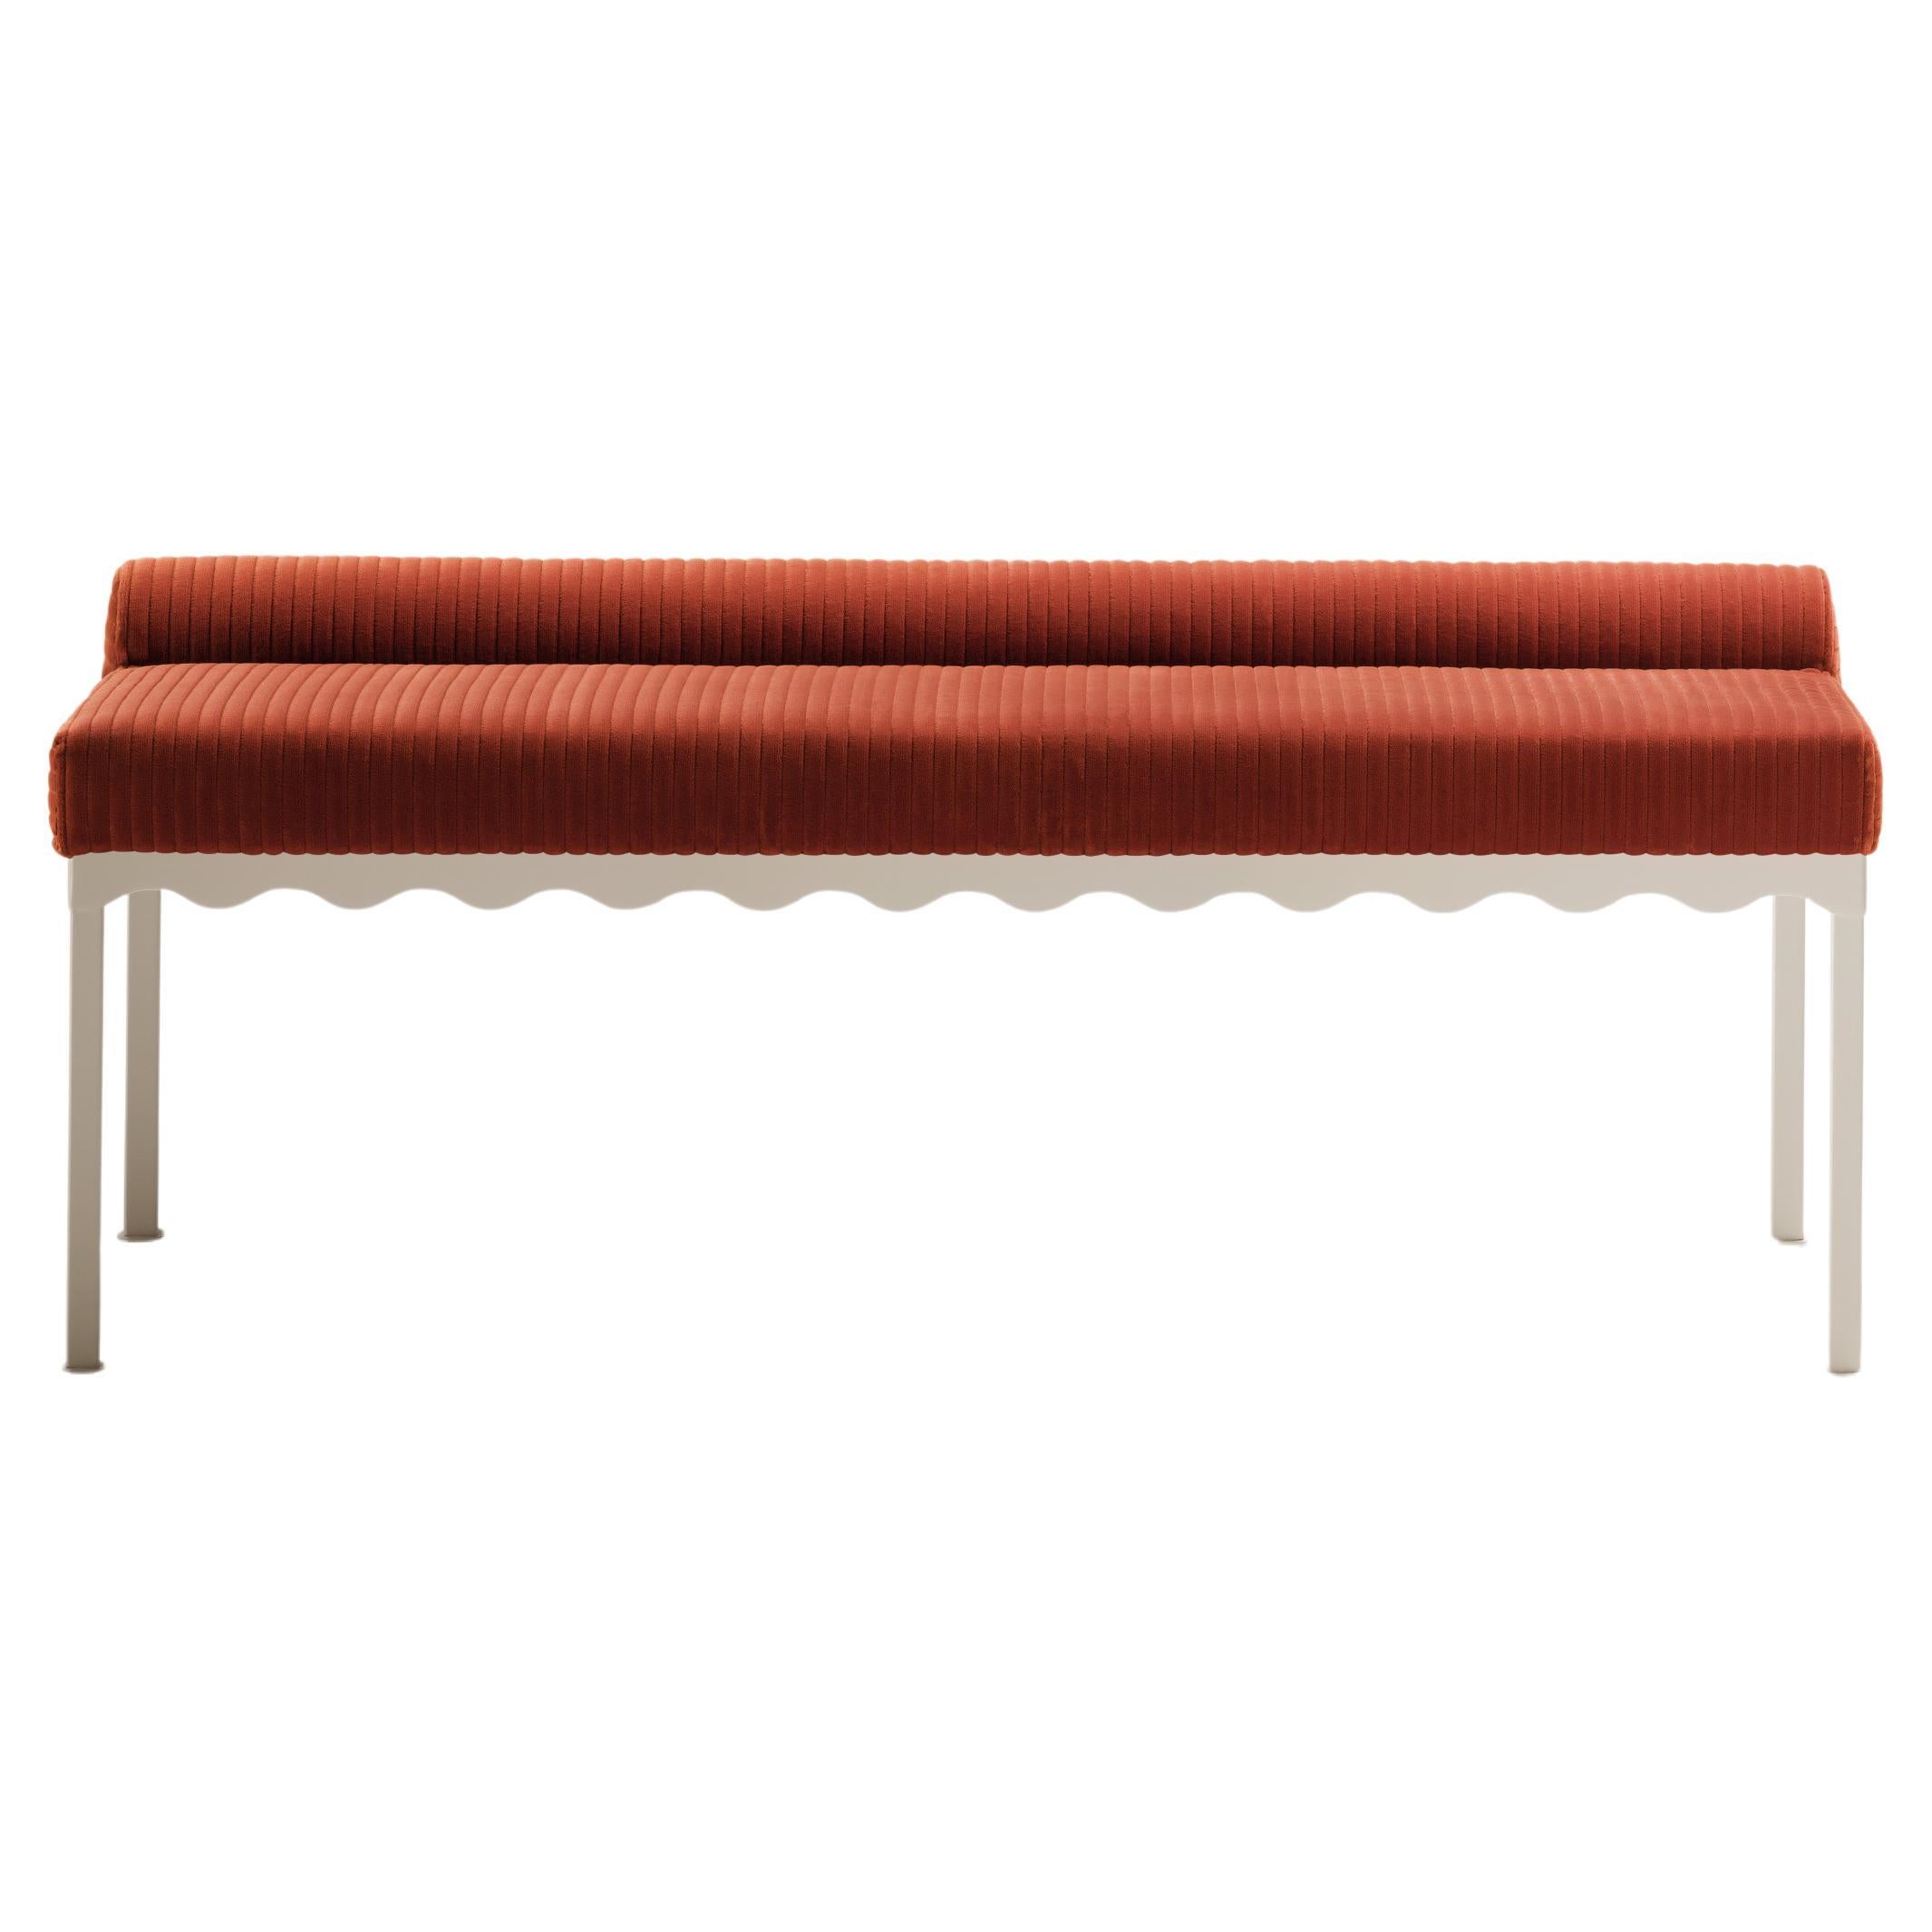 Sanguine Bellini 1340 Bench by Coco Flip For Sale